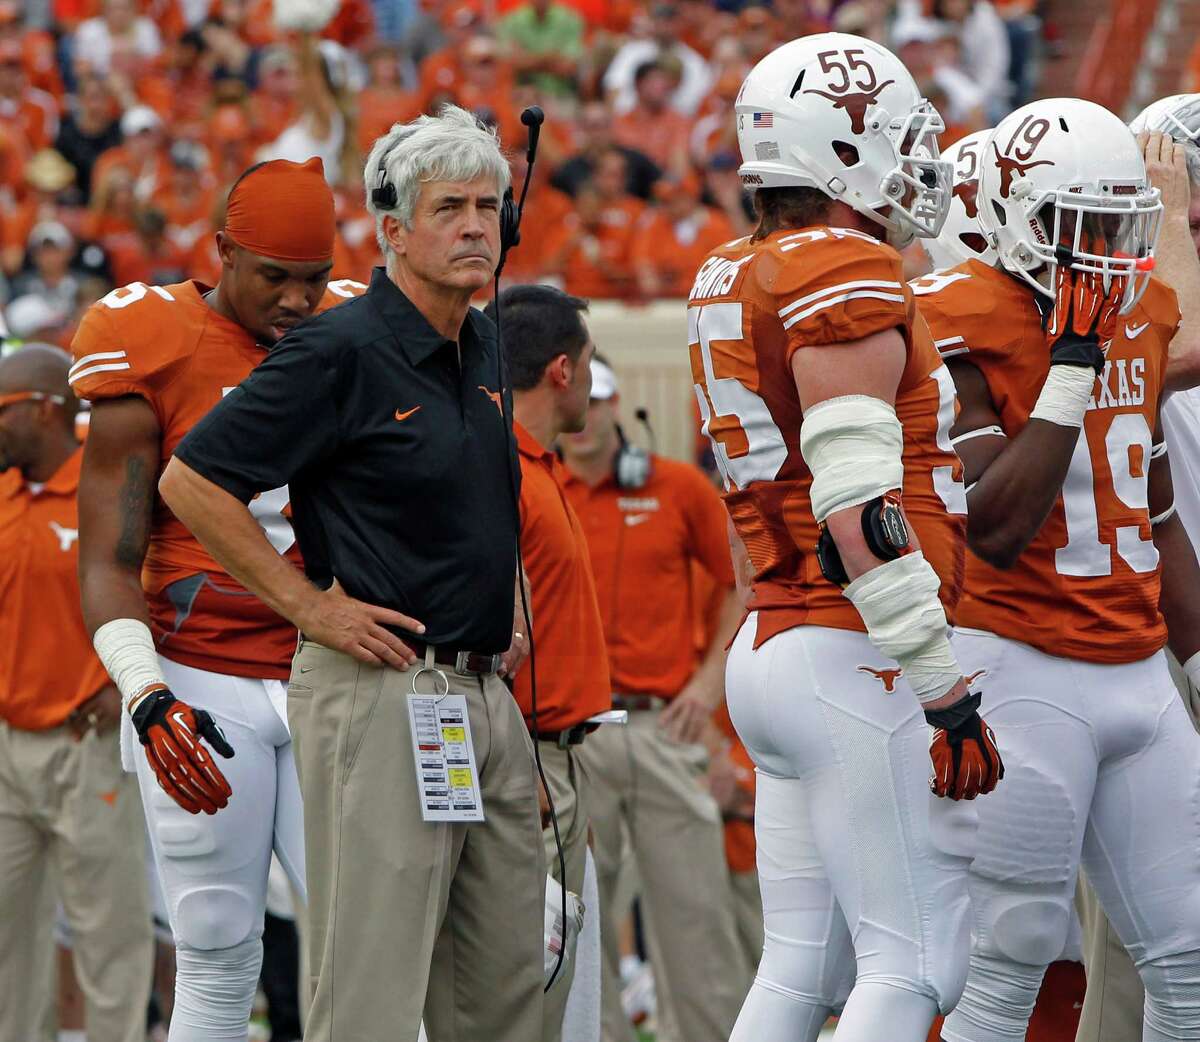 Texas defensive coordinator Greg Robinson﻿, who ﻿oversaw a dramatic turnaround by the Longhorns this season, will face another tough task in Monday's Alamo Bowl against Oregon's potent offense.